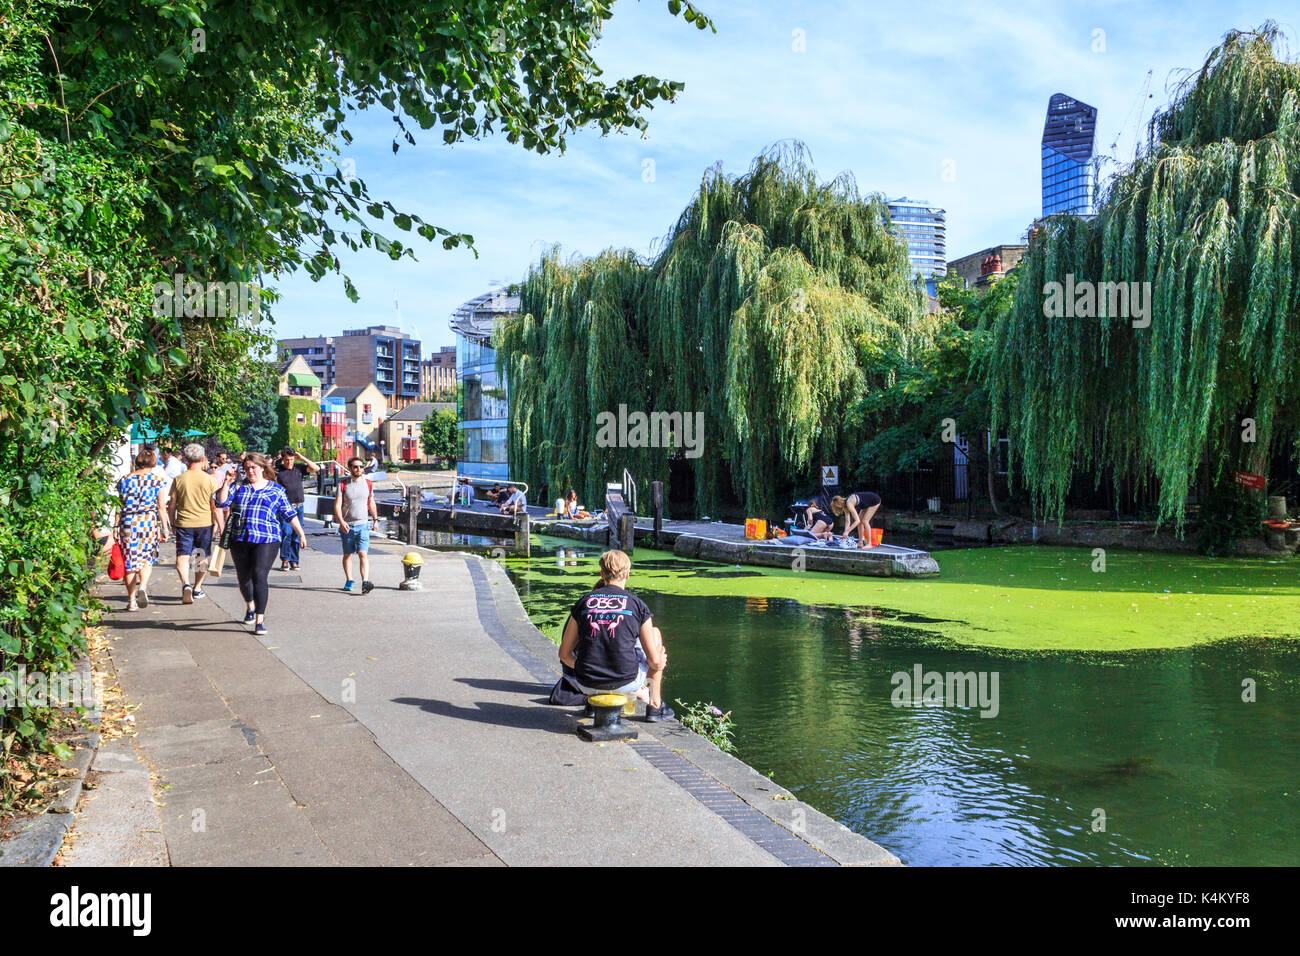 People basking in the sun and cooling off by City Road Lock as summer temperatures rise, Regent's Canal, Islington, London, UK Stock Photo